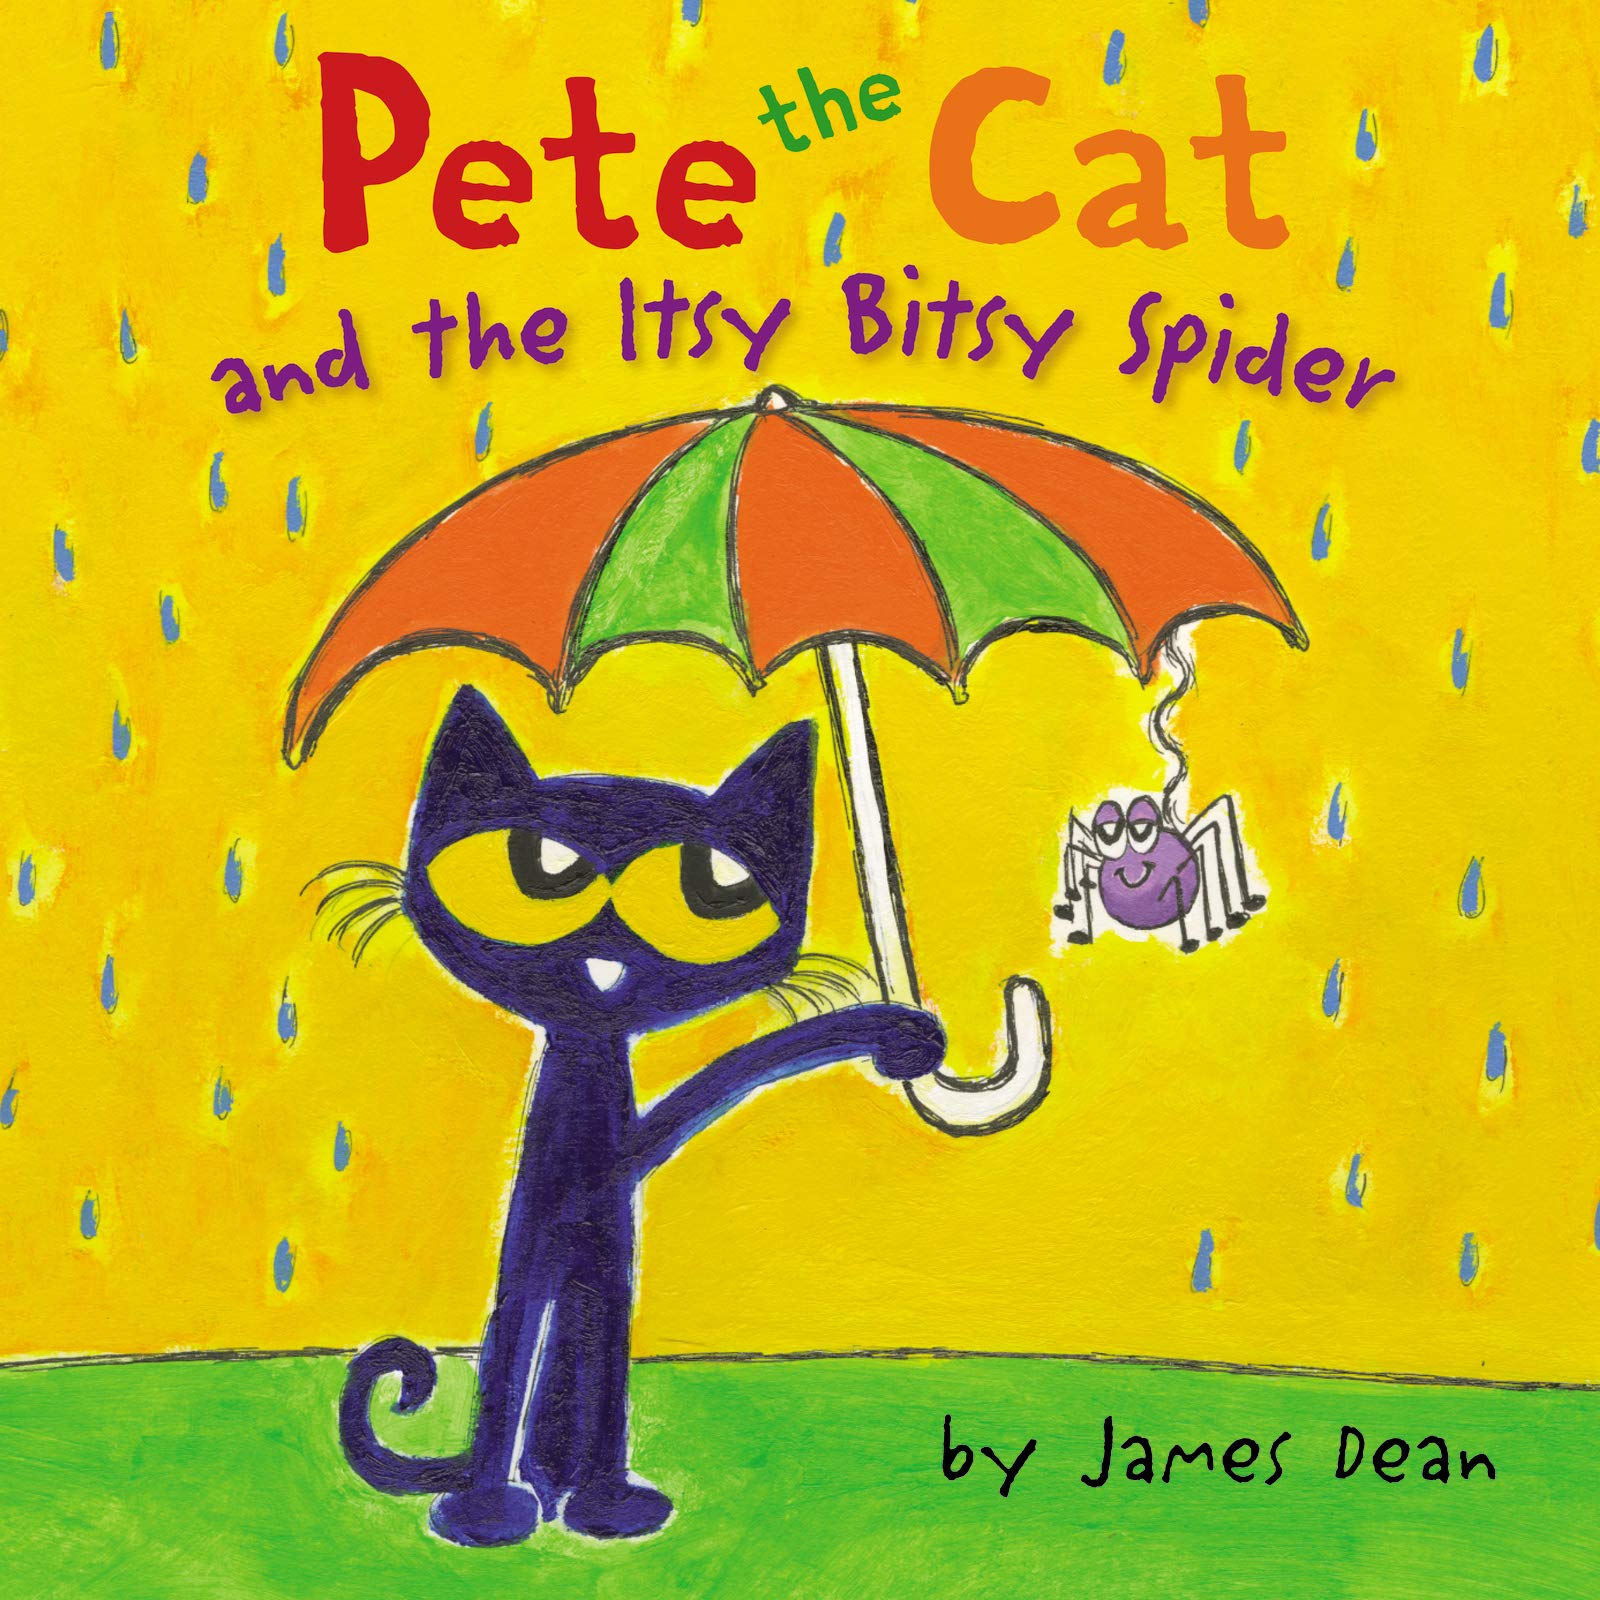 speech and language teaching concepts for Pete the Cat and the Itsy Bitsy Spider in speech therapy​ ​